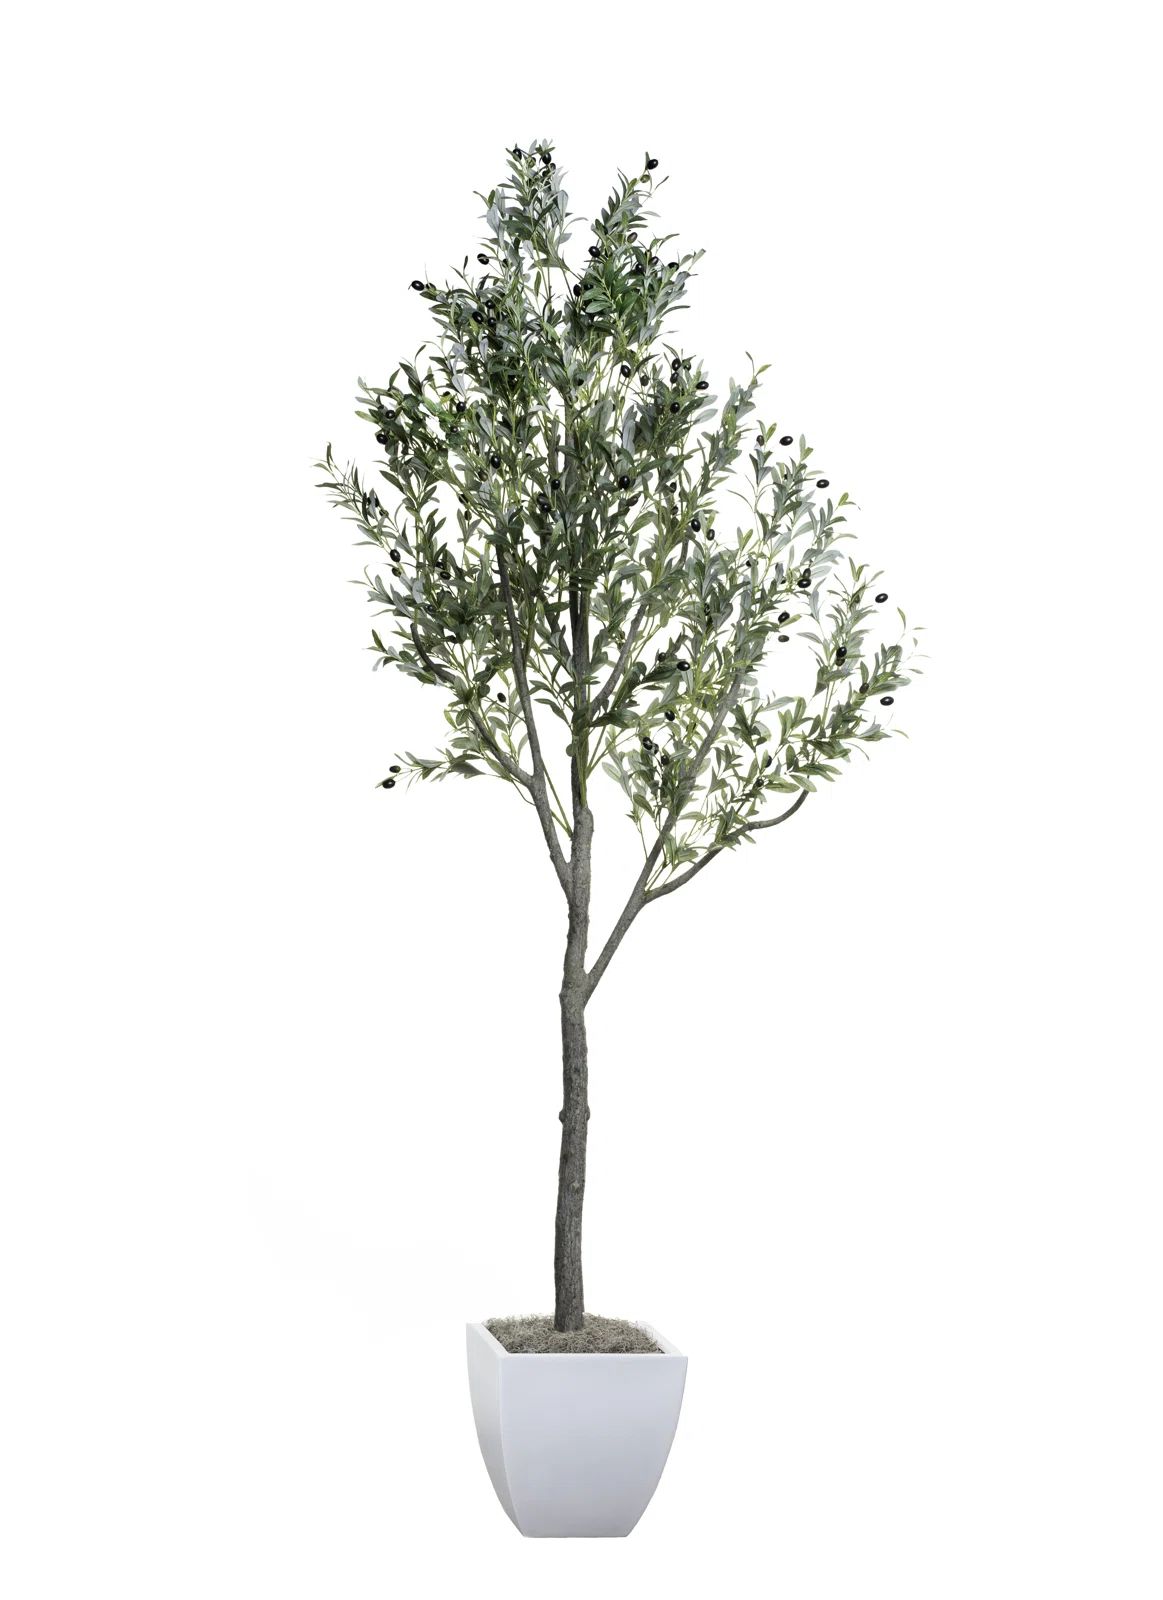 94" Artificial Olive Tree Tree in Pot Liner | Wayfair Professional